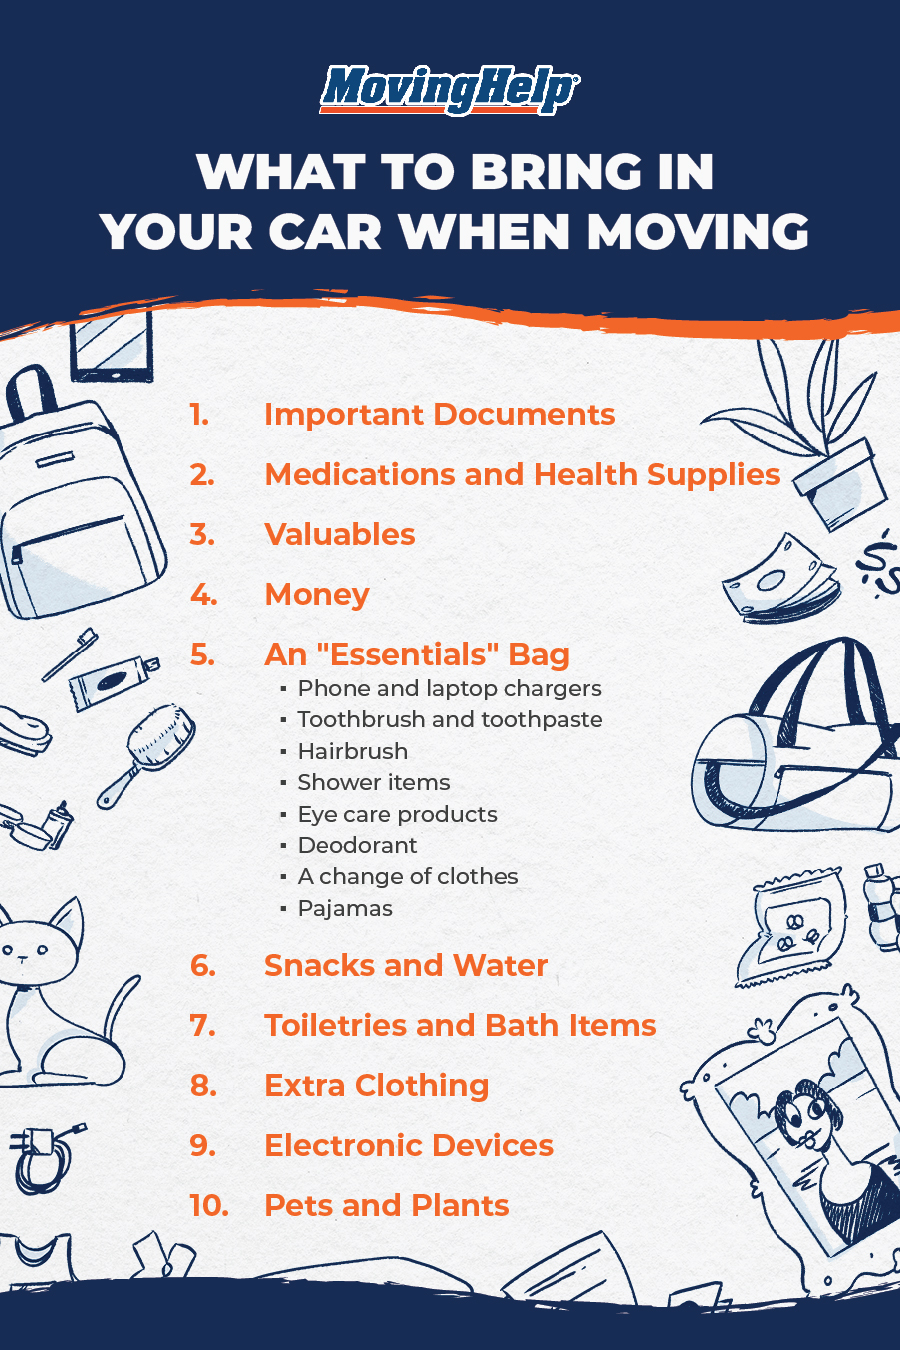 9 Simple Tips To Help You Keep Your Used Car Clean - Ride Time